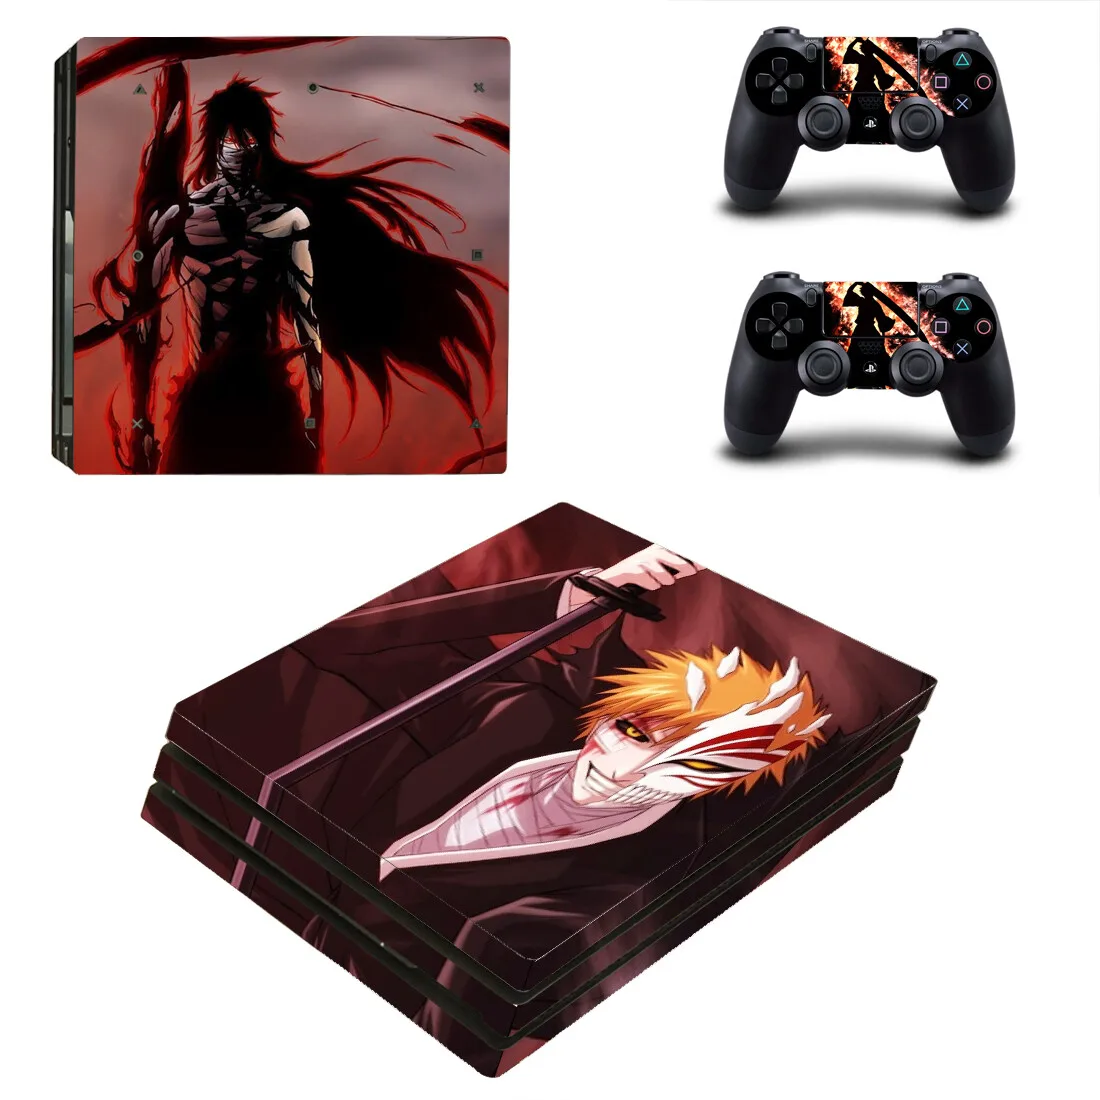 Anime Bleach PS4 Pro Skin Sticker Decals Cover For PlayStation 4 PS4 Pro Console & Controller Skins Vinyl